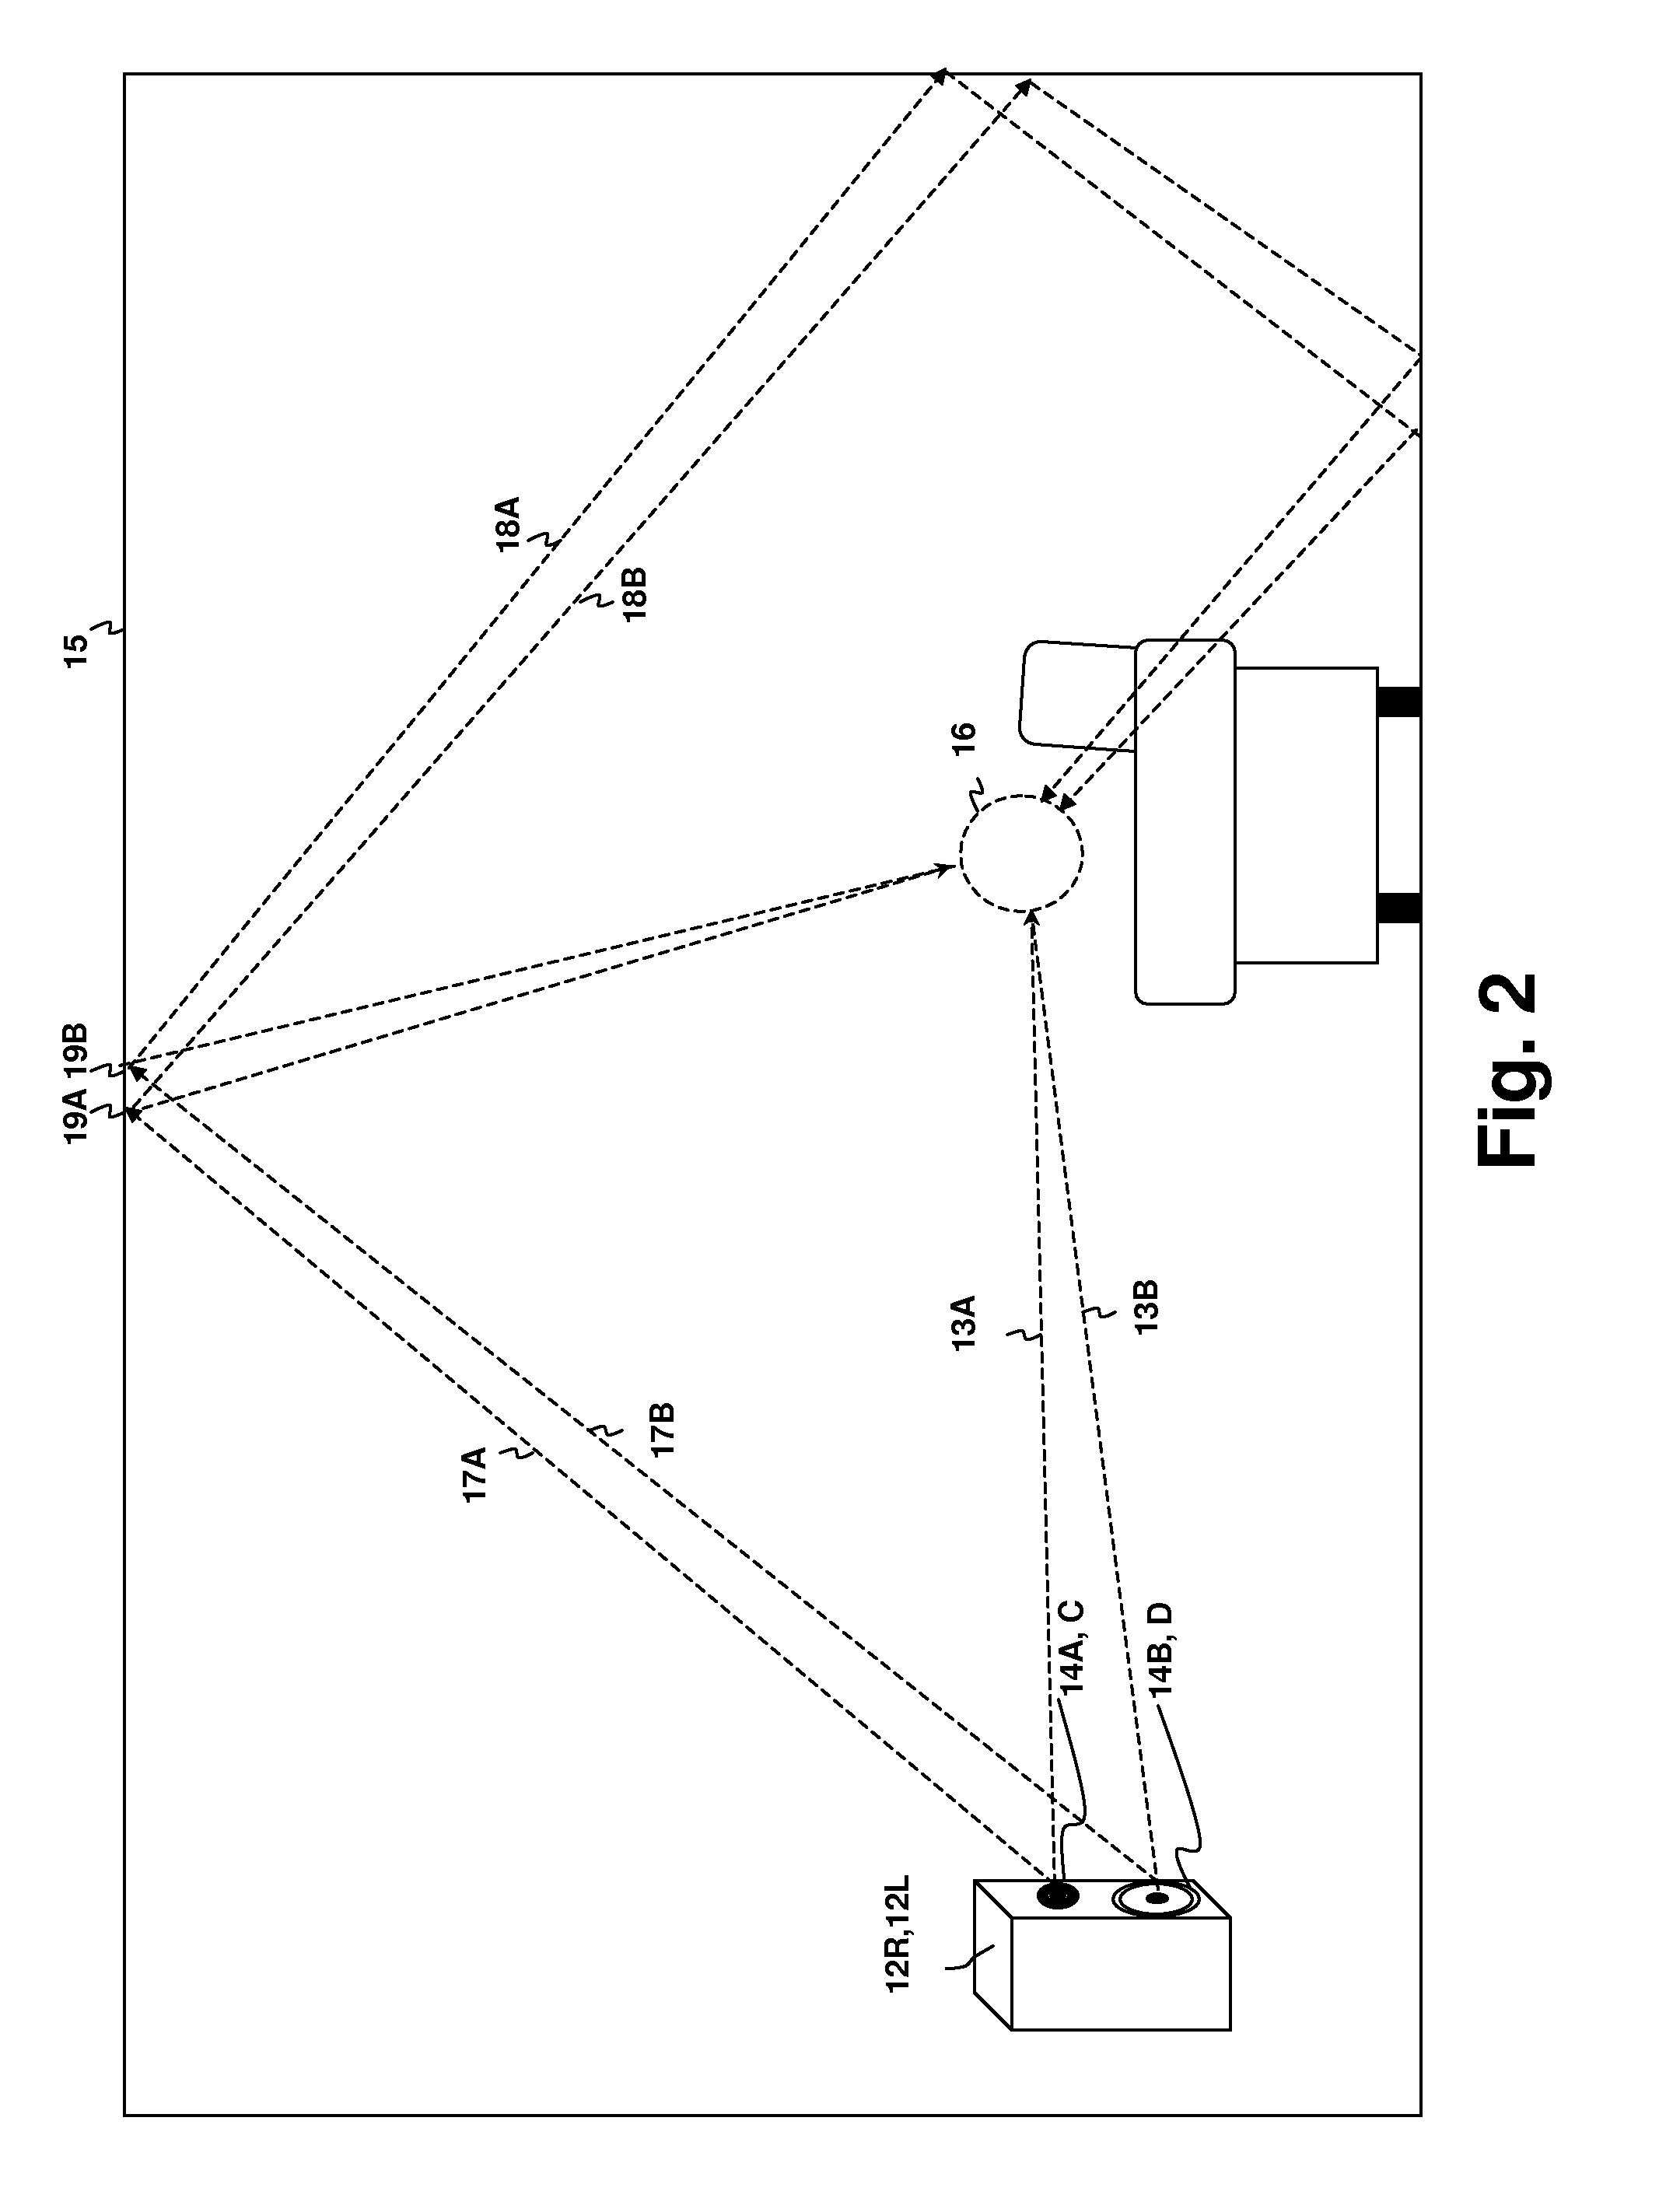 Method and system for surround sound beam-forming using the overlapping portion of driver frequency ranges